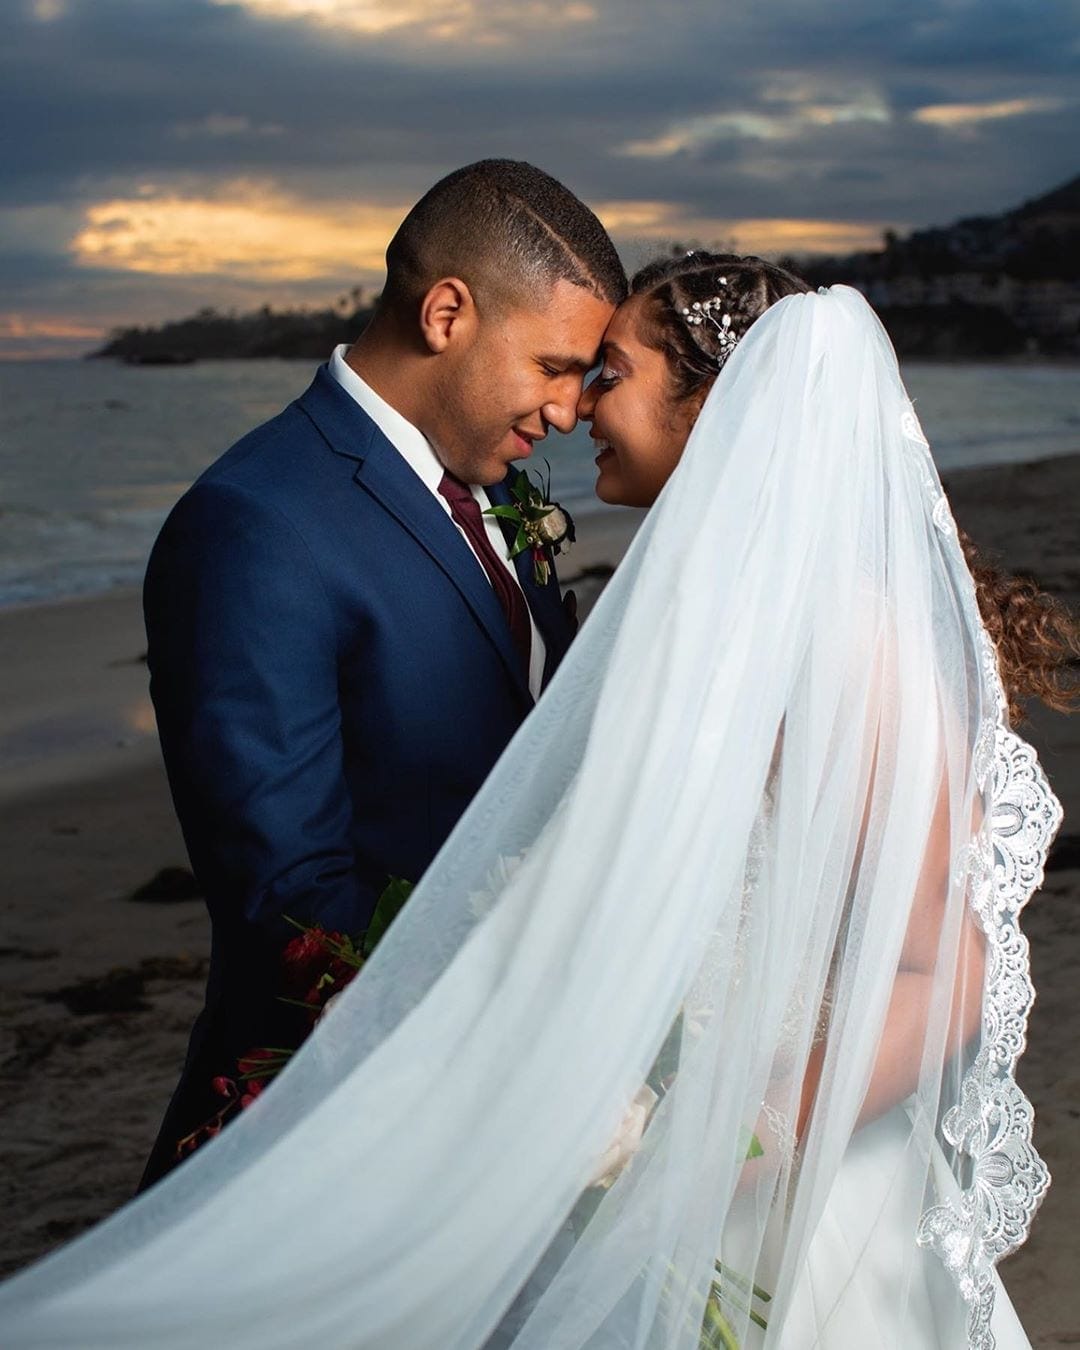 A couple celebrating their special day at a picturesque beach during sunset in Southern California.